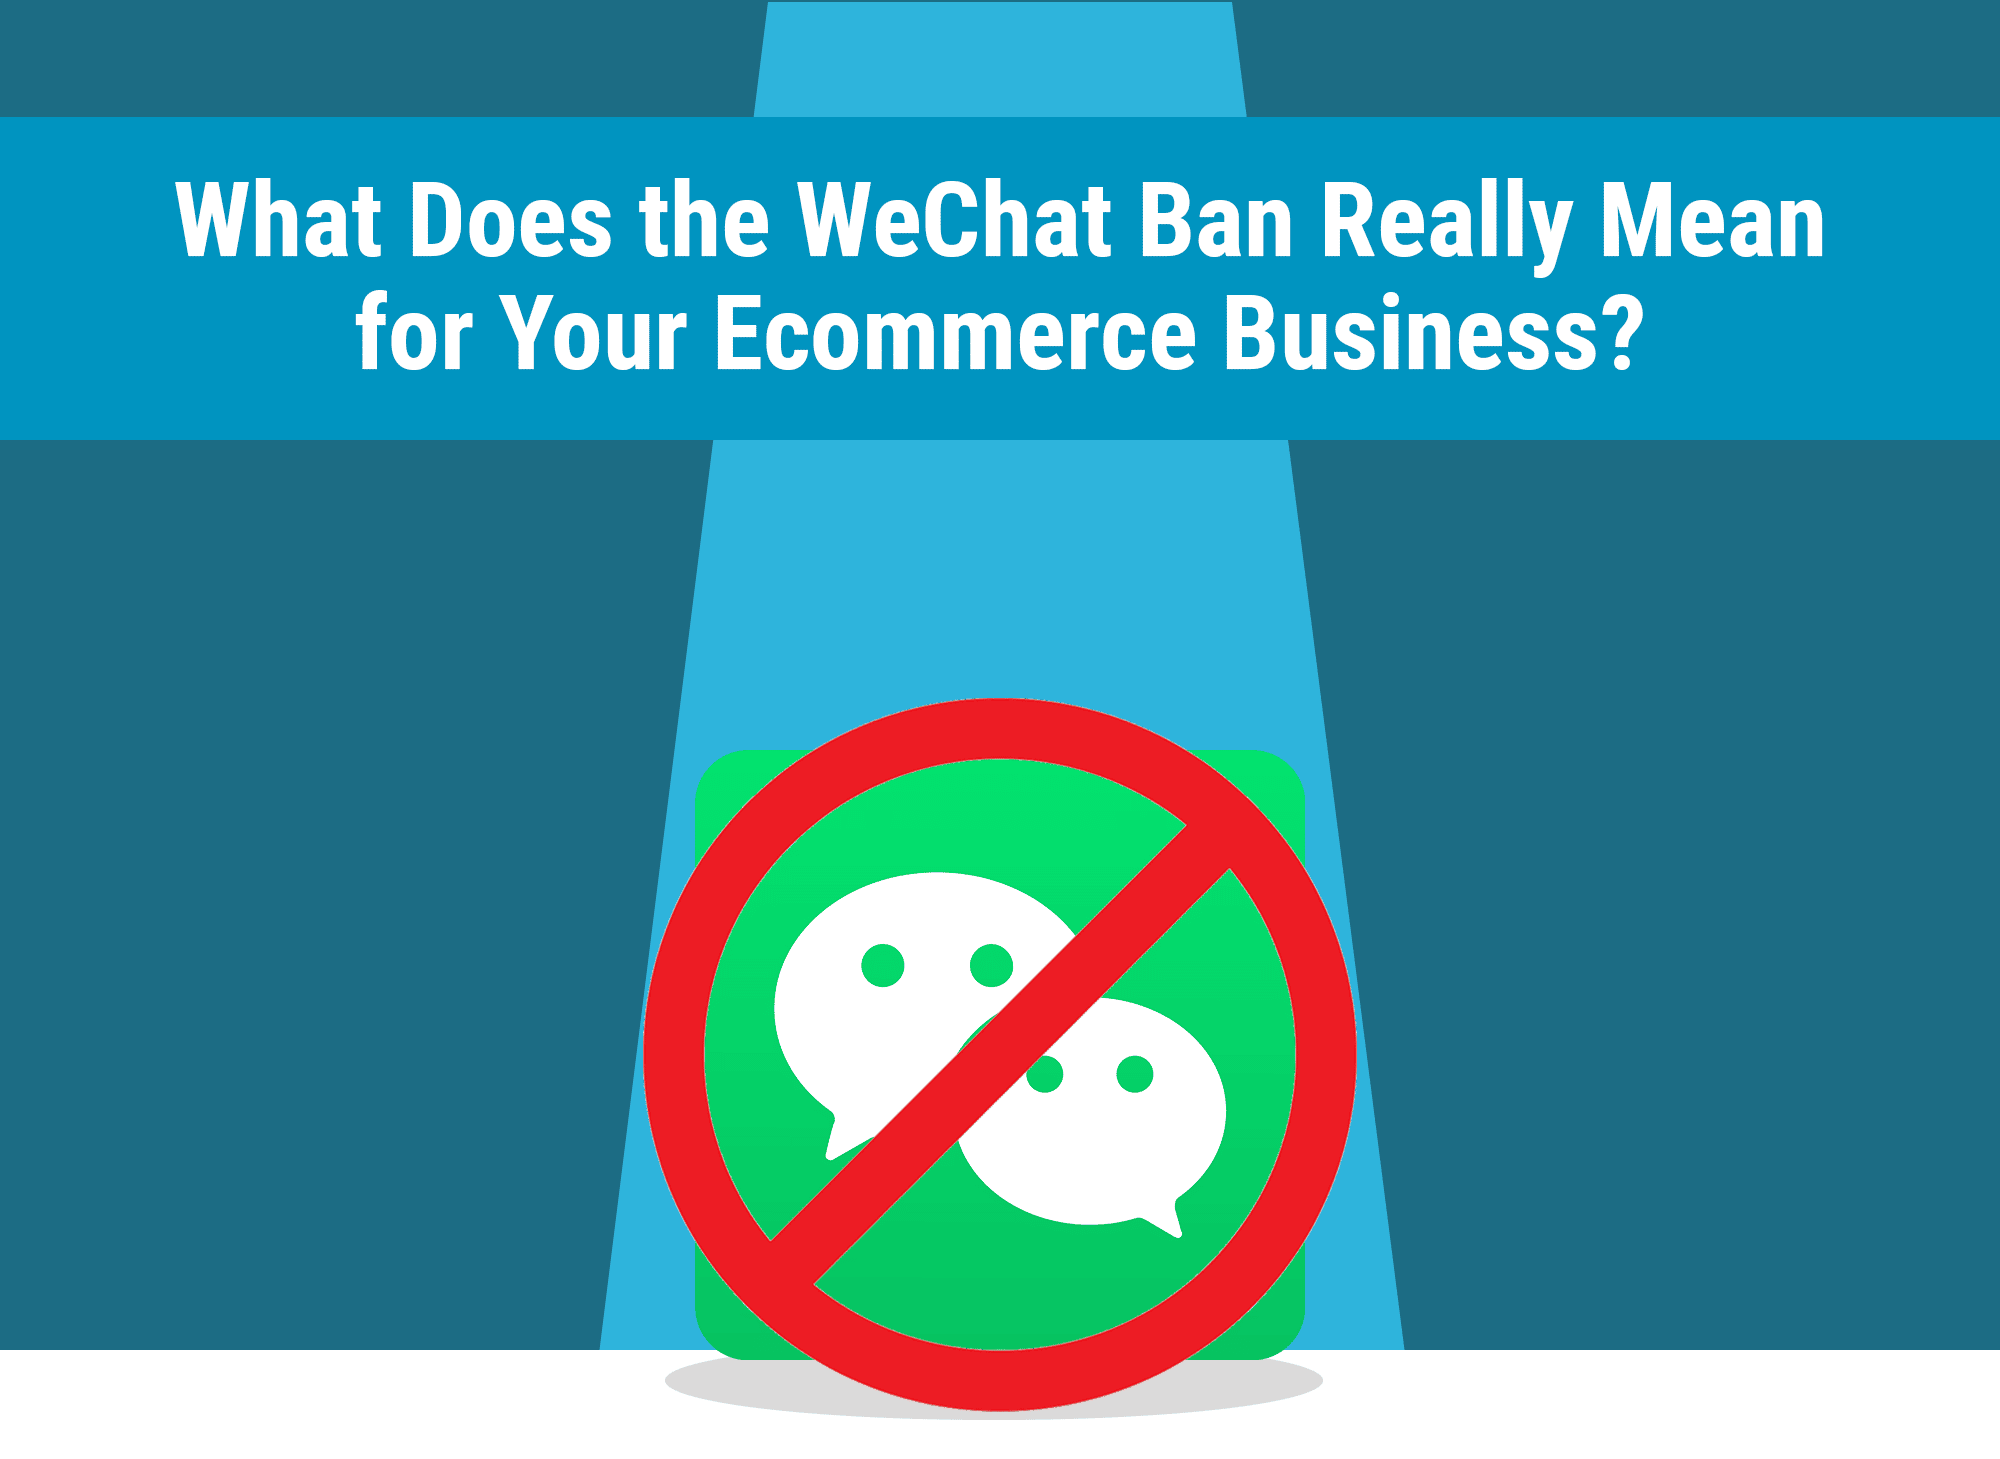 What Does the WeChat Ban Mean for Your Ecommerce Business?